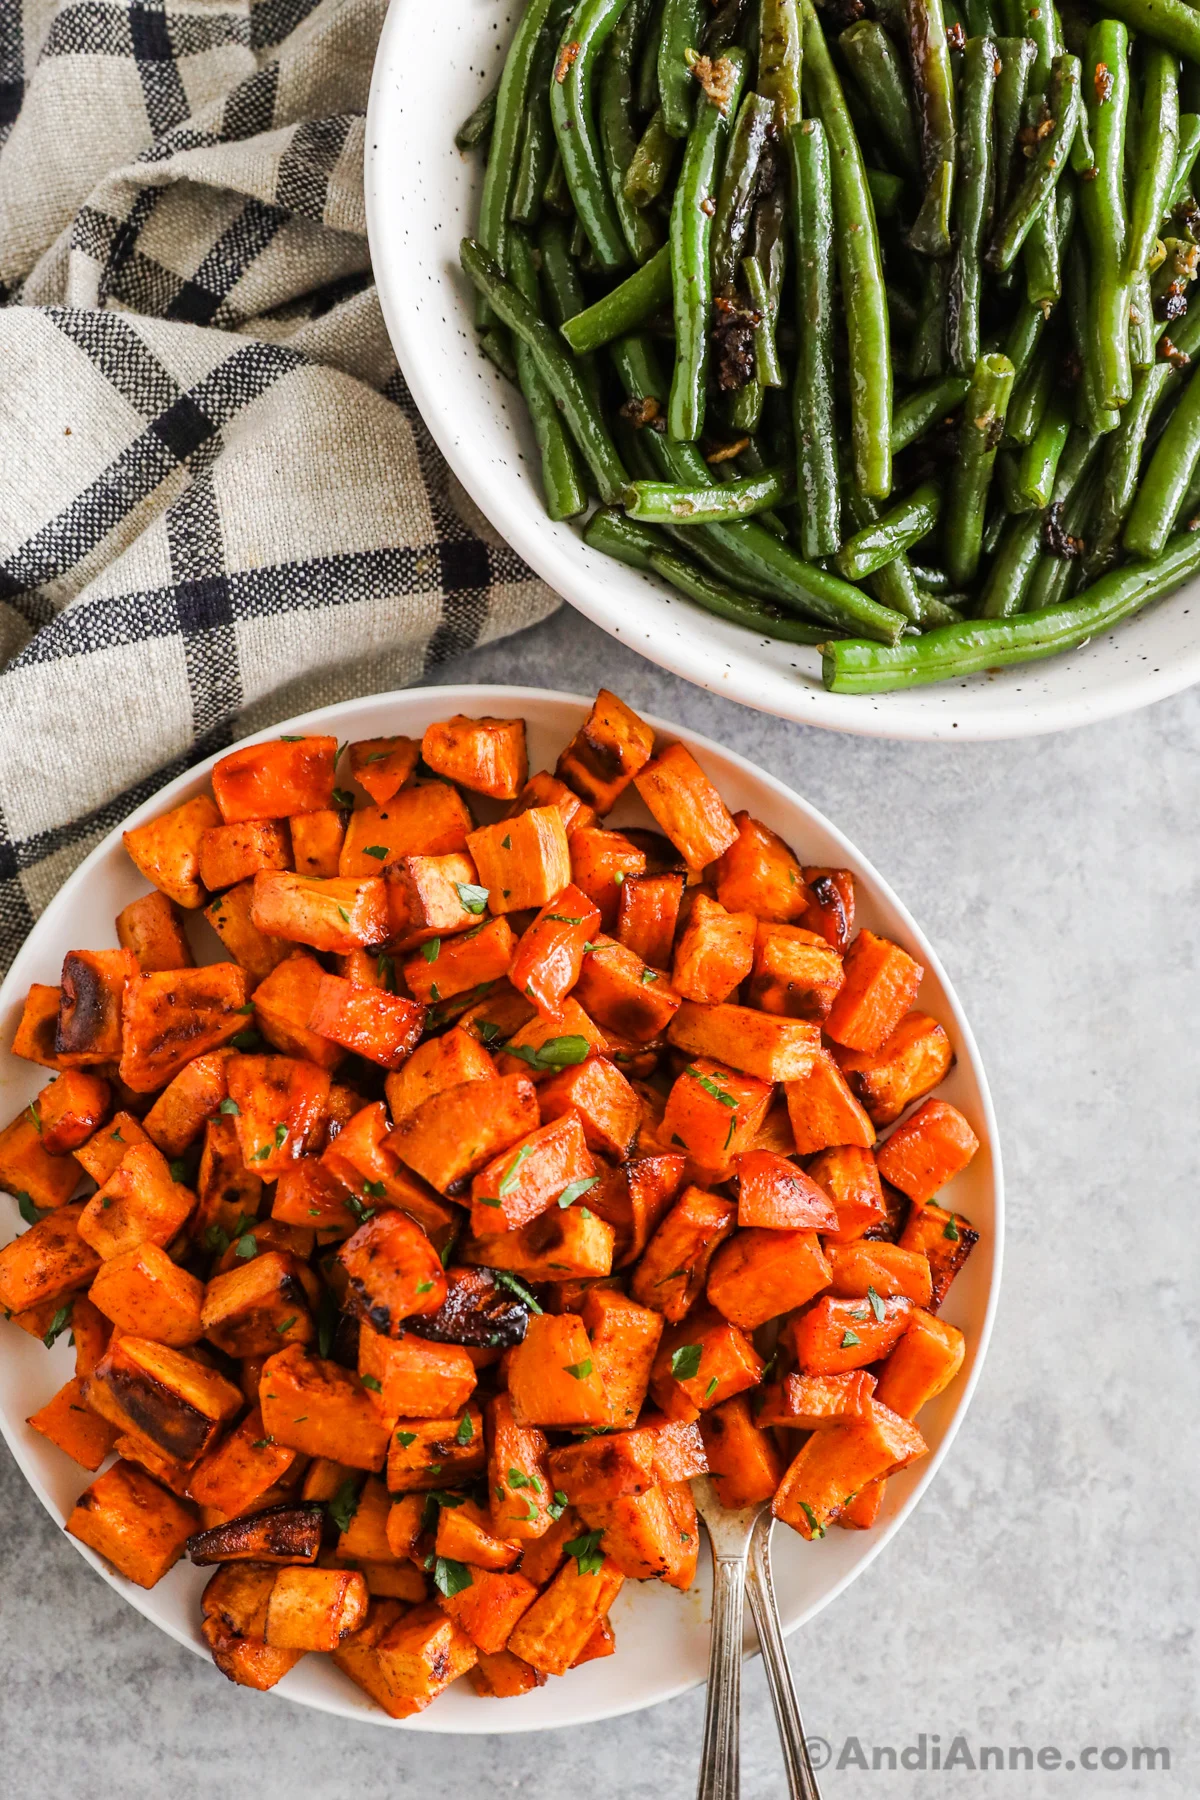 A bowl of cubed honey cinnamon roasted sweet potatoes and a bowl of sauteed green beans.